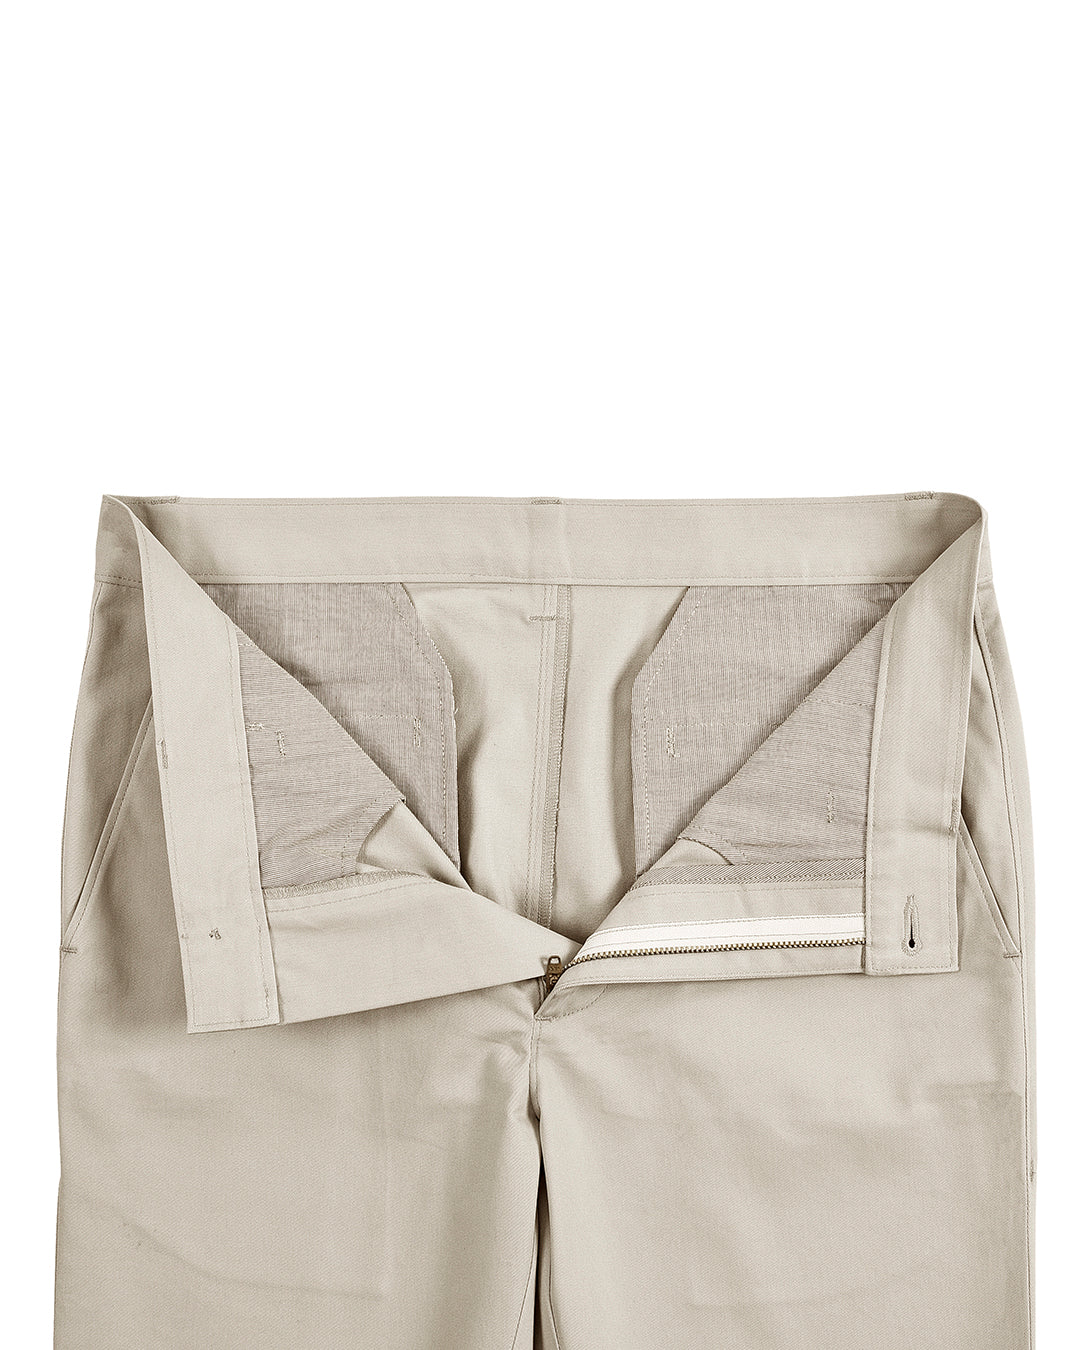 Open front view of custom Genoa Chino pants for men by Luxire in light beige